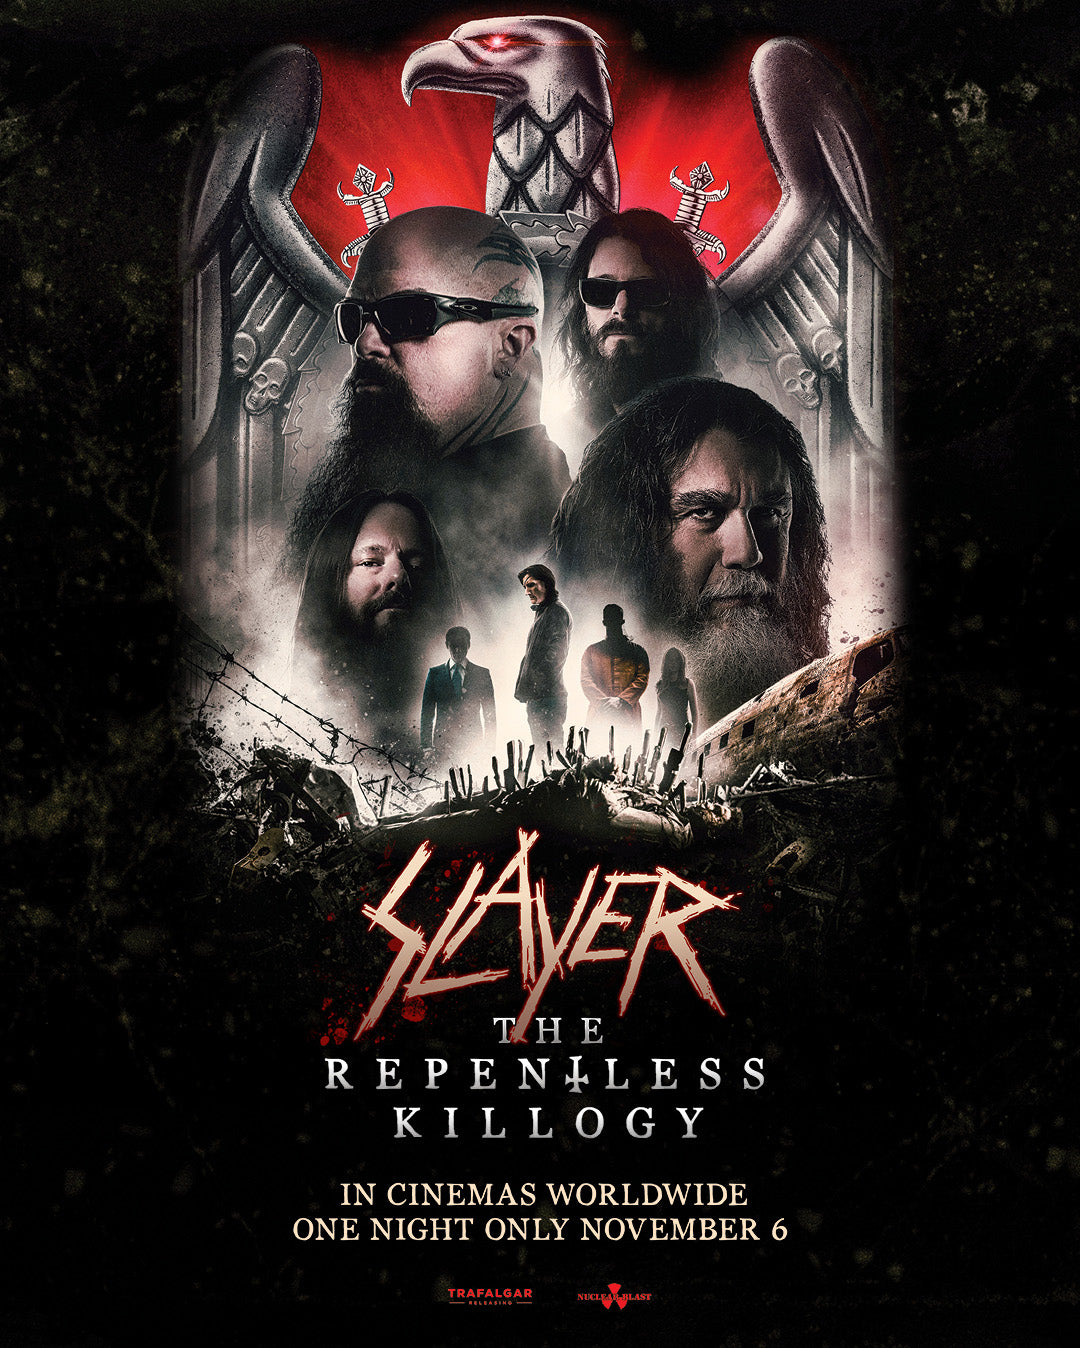 New Slayer live release will be premiered in theaters worldwide